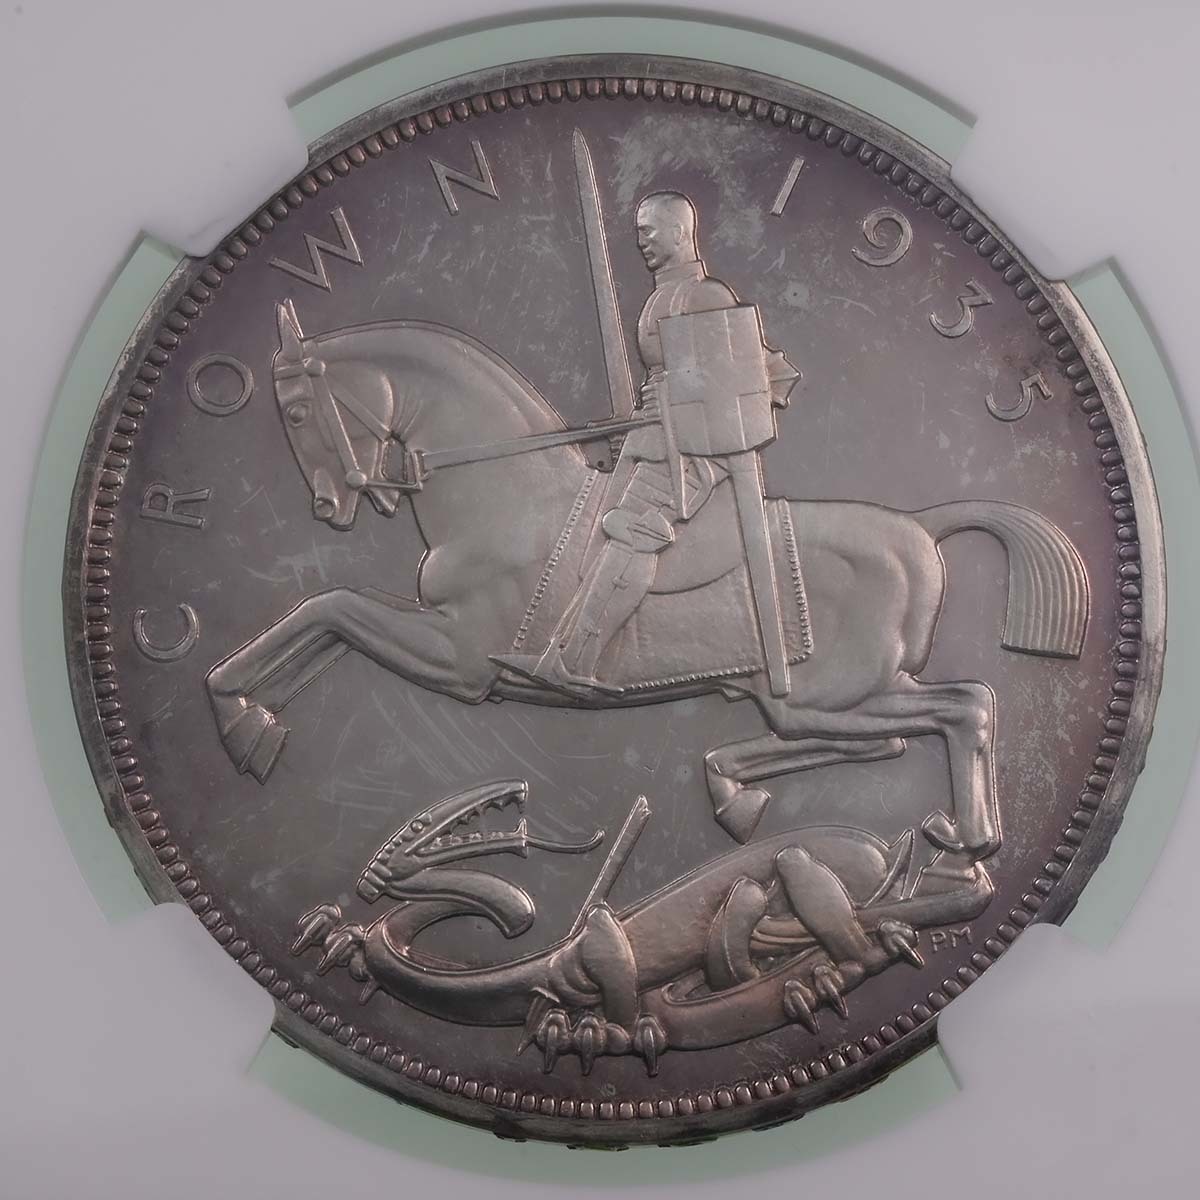 1935 George V Jubilee Crown Silver Coin Raised Edge Lettering Graded PF 63 Ultra Cameo Reverse